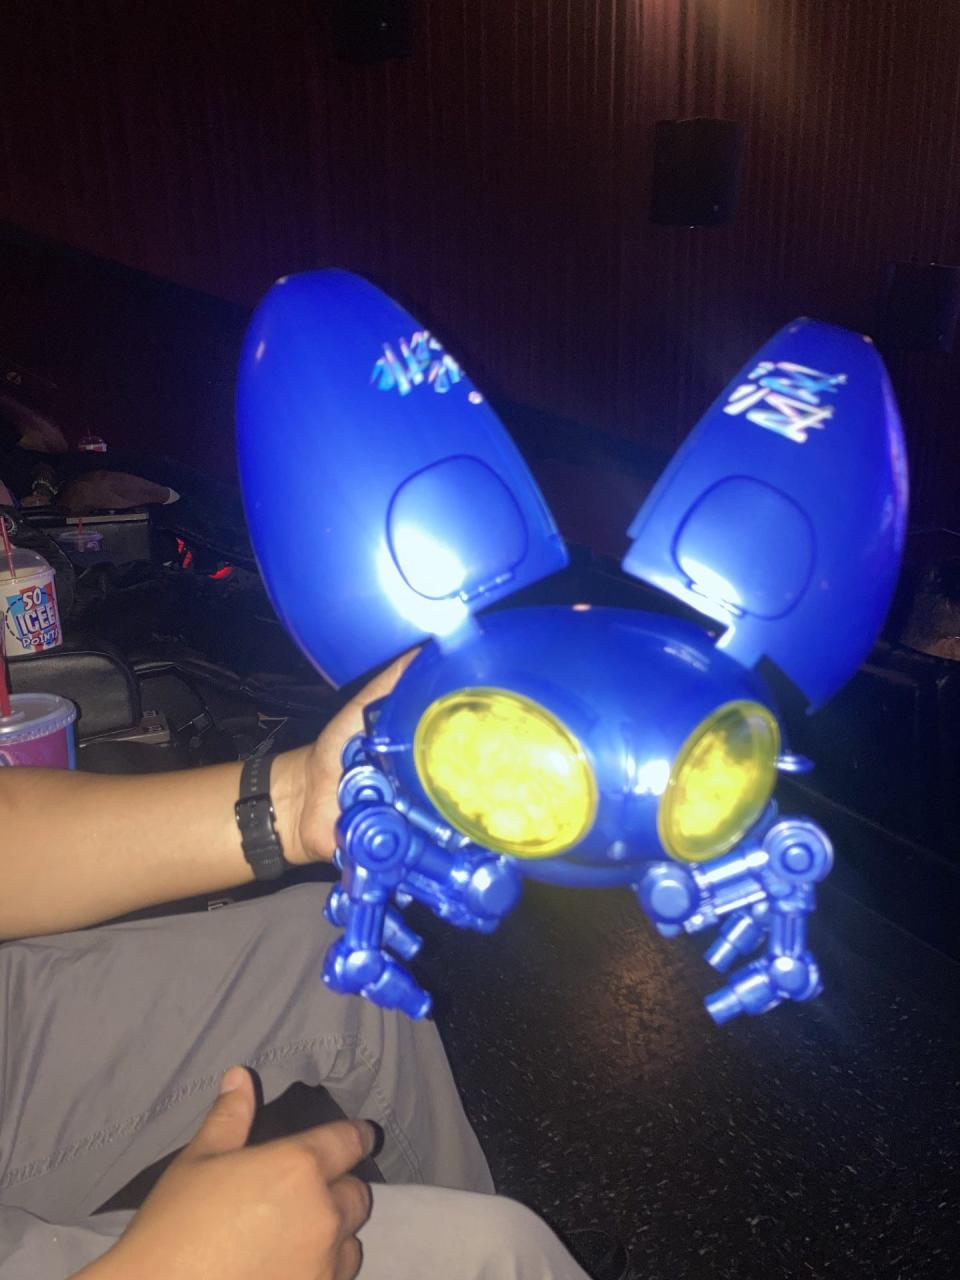 El Paso fans are enjoying getting "Blue Beetle" merchandise including this beetle-shaped popcorn holder for $25, plus tax, available at Cinemark theaters.